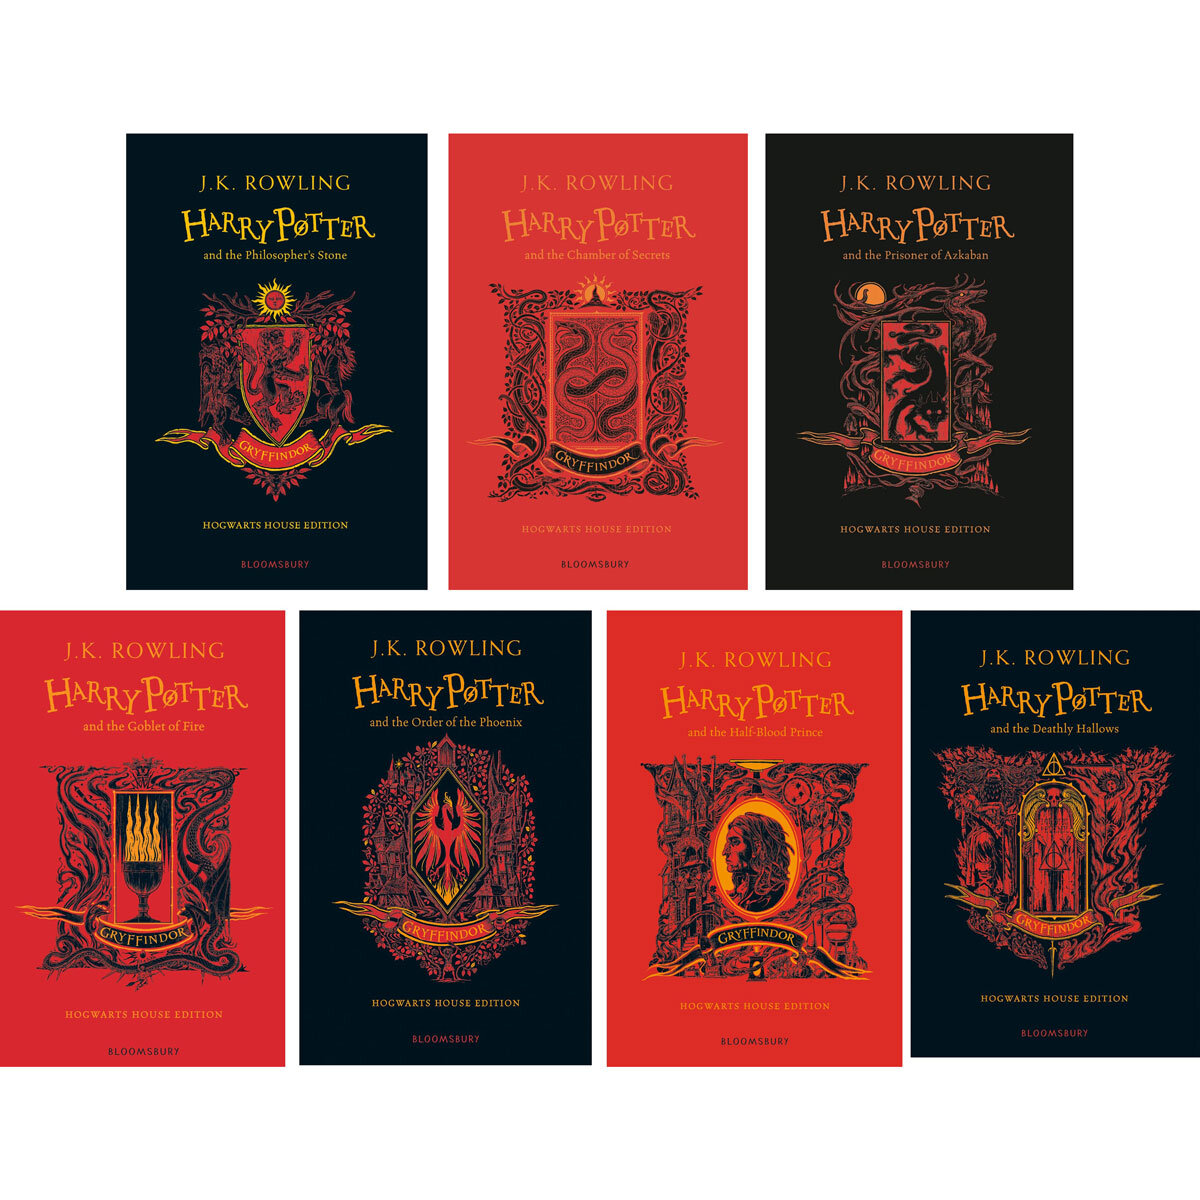 Bloomsbury Release Final Set Of Hogwarts House Editions, 45% OFF